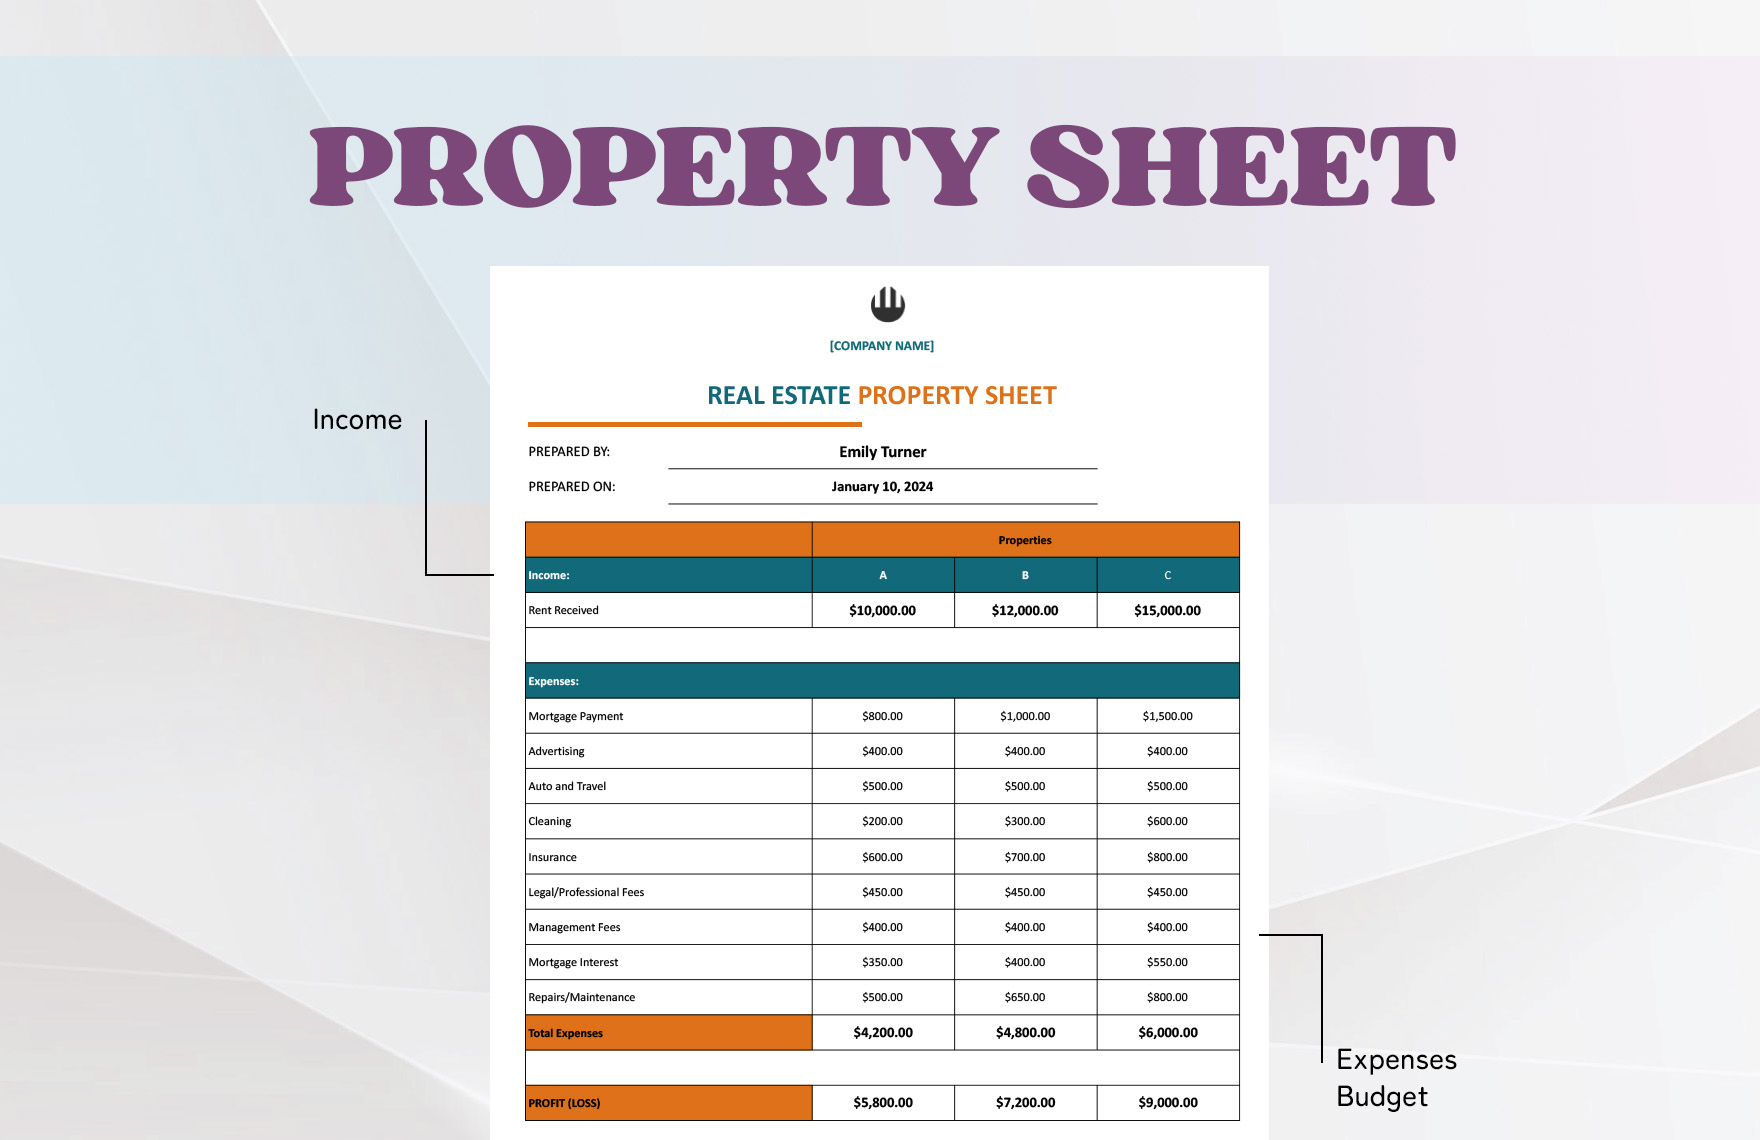 Real Estate Property Sheet Template